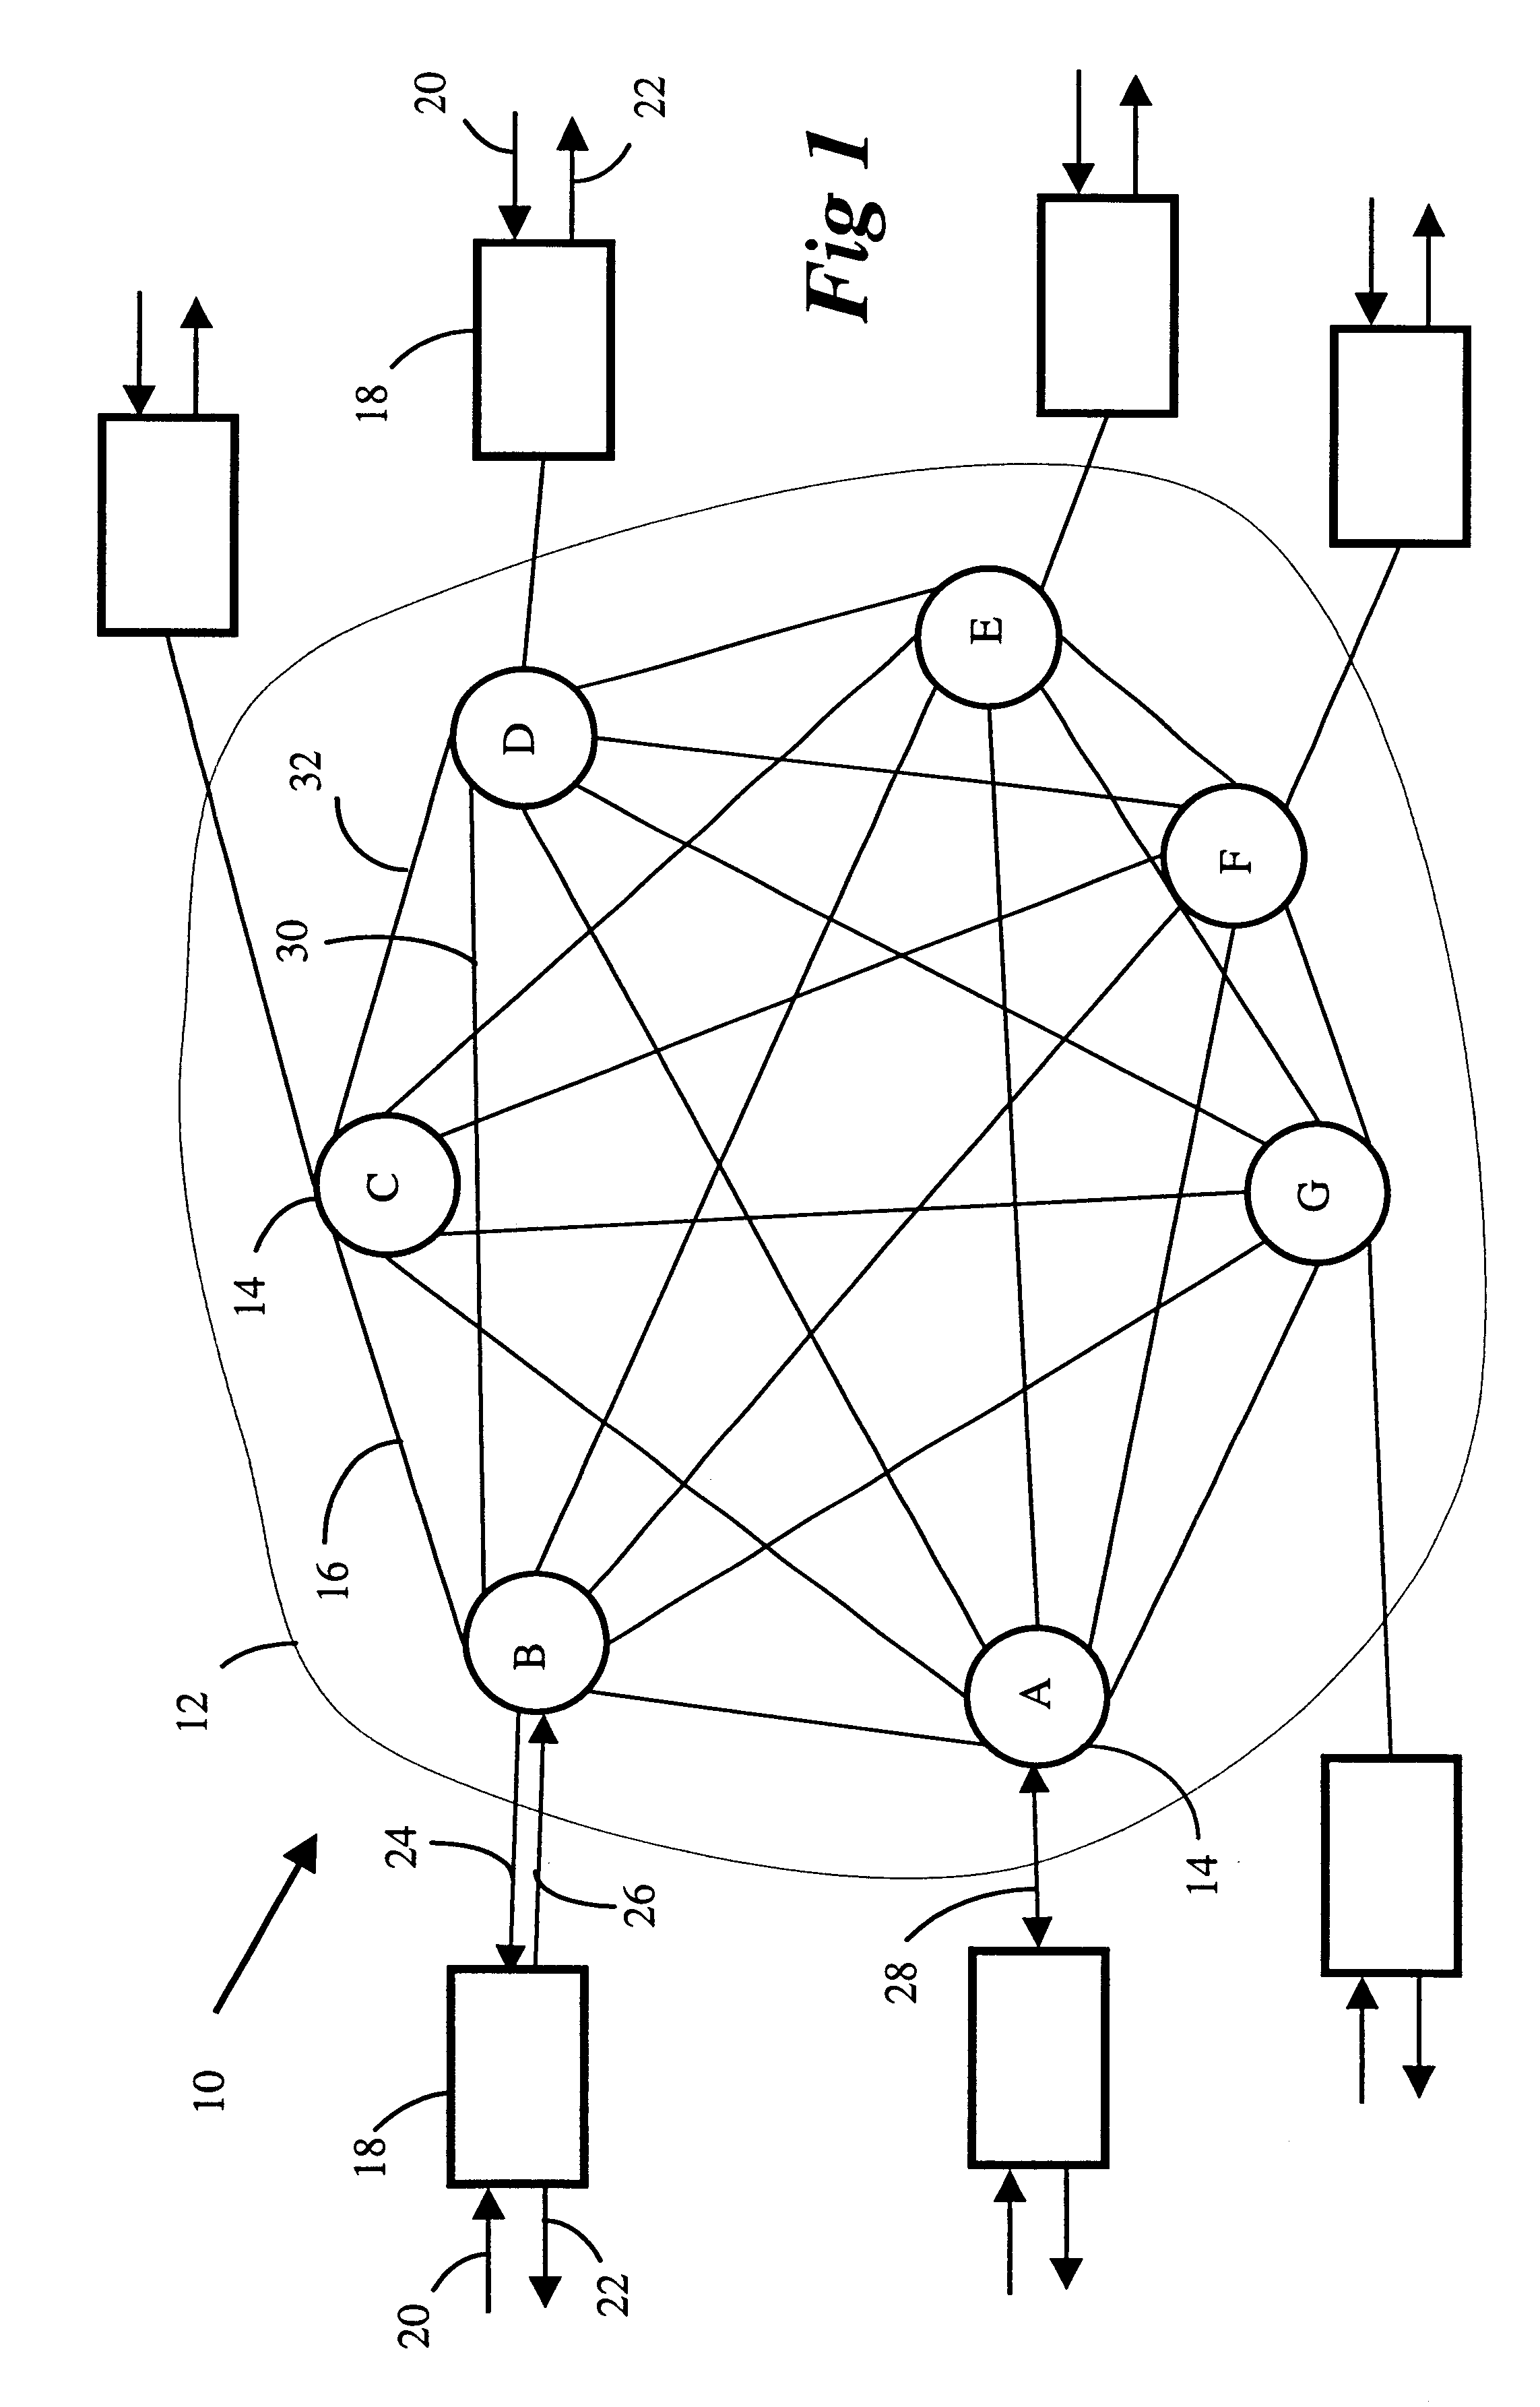 Large scale communications network having a fully meshed optical core transport network